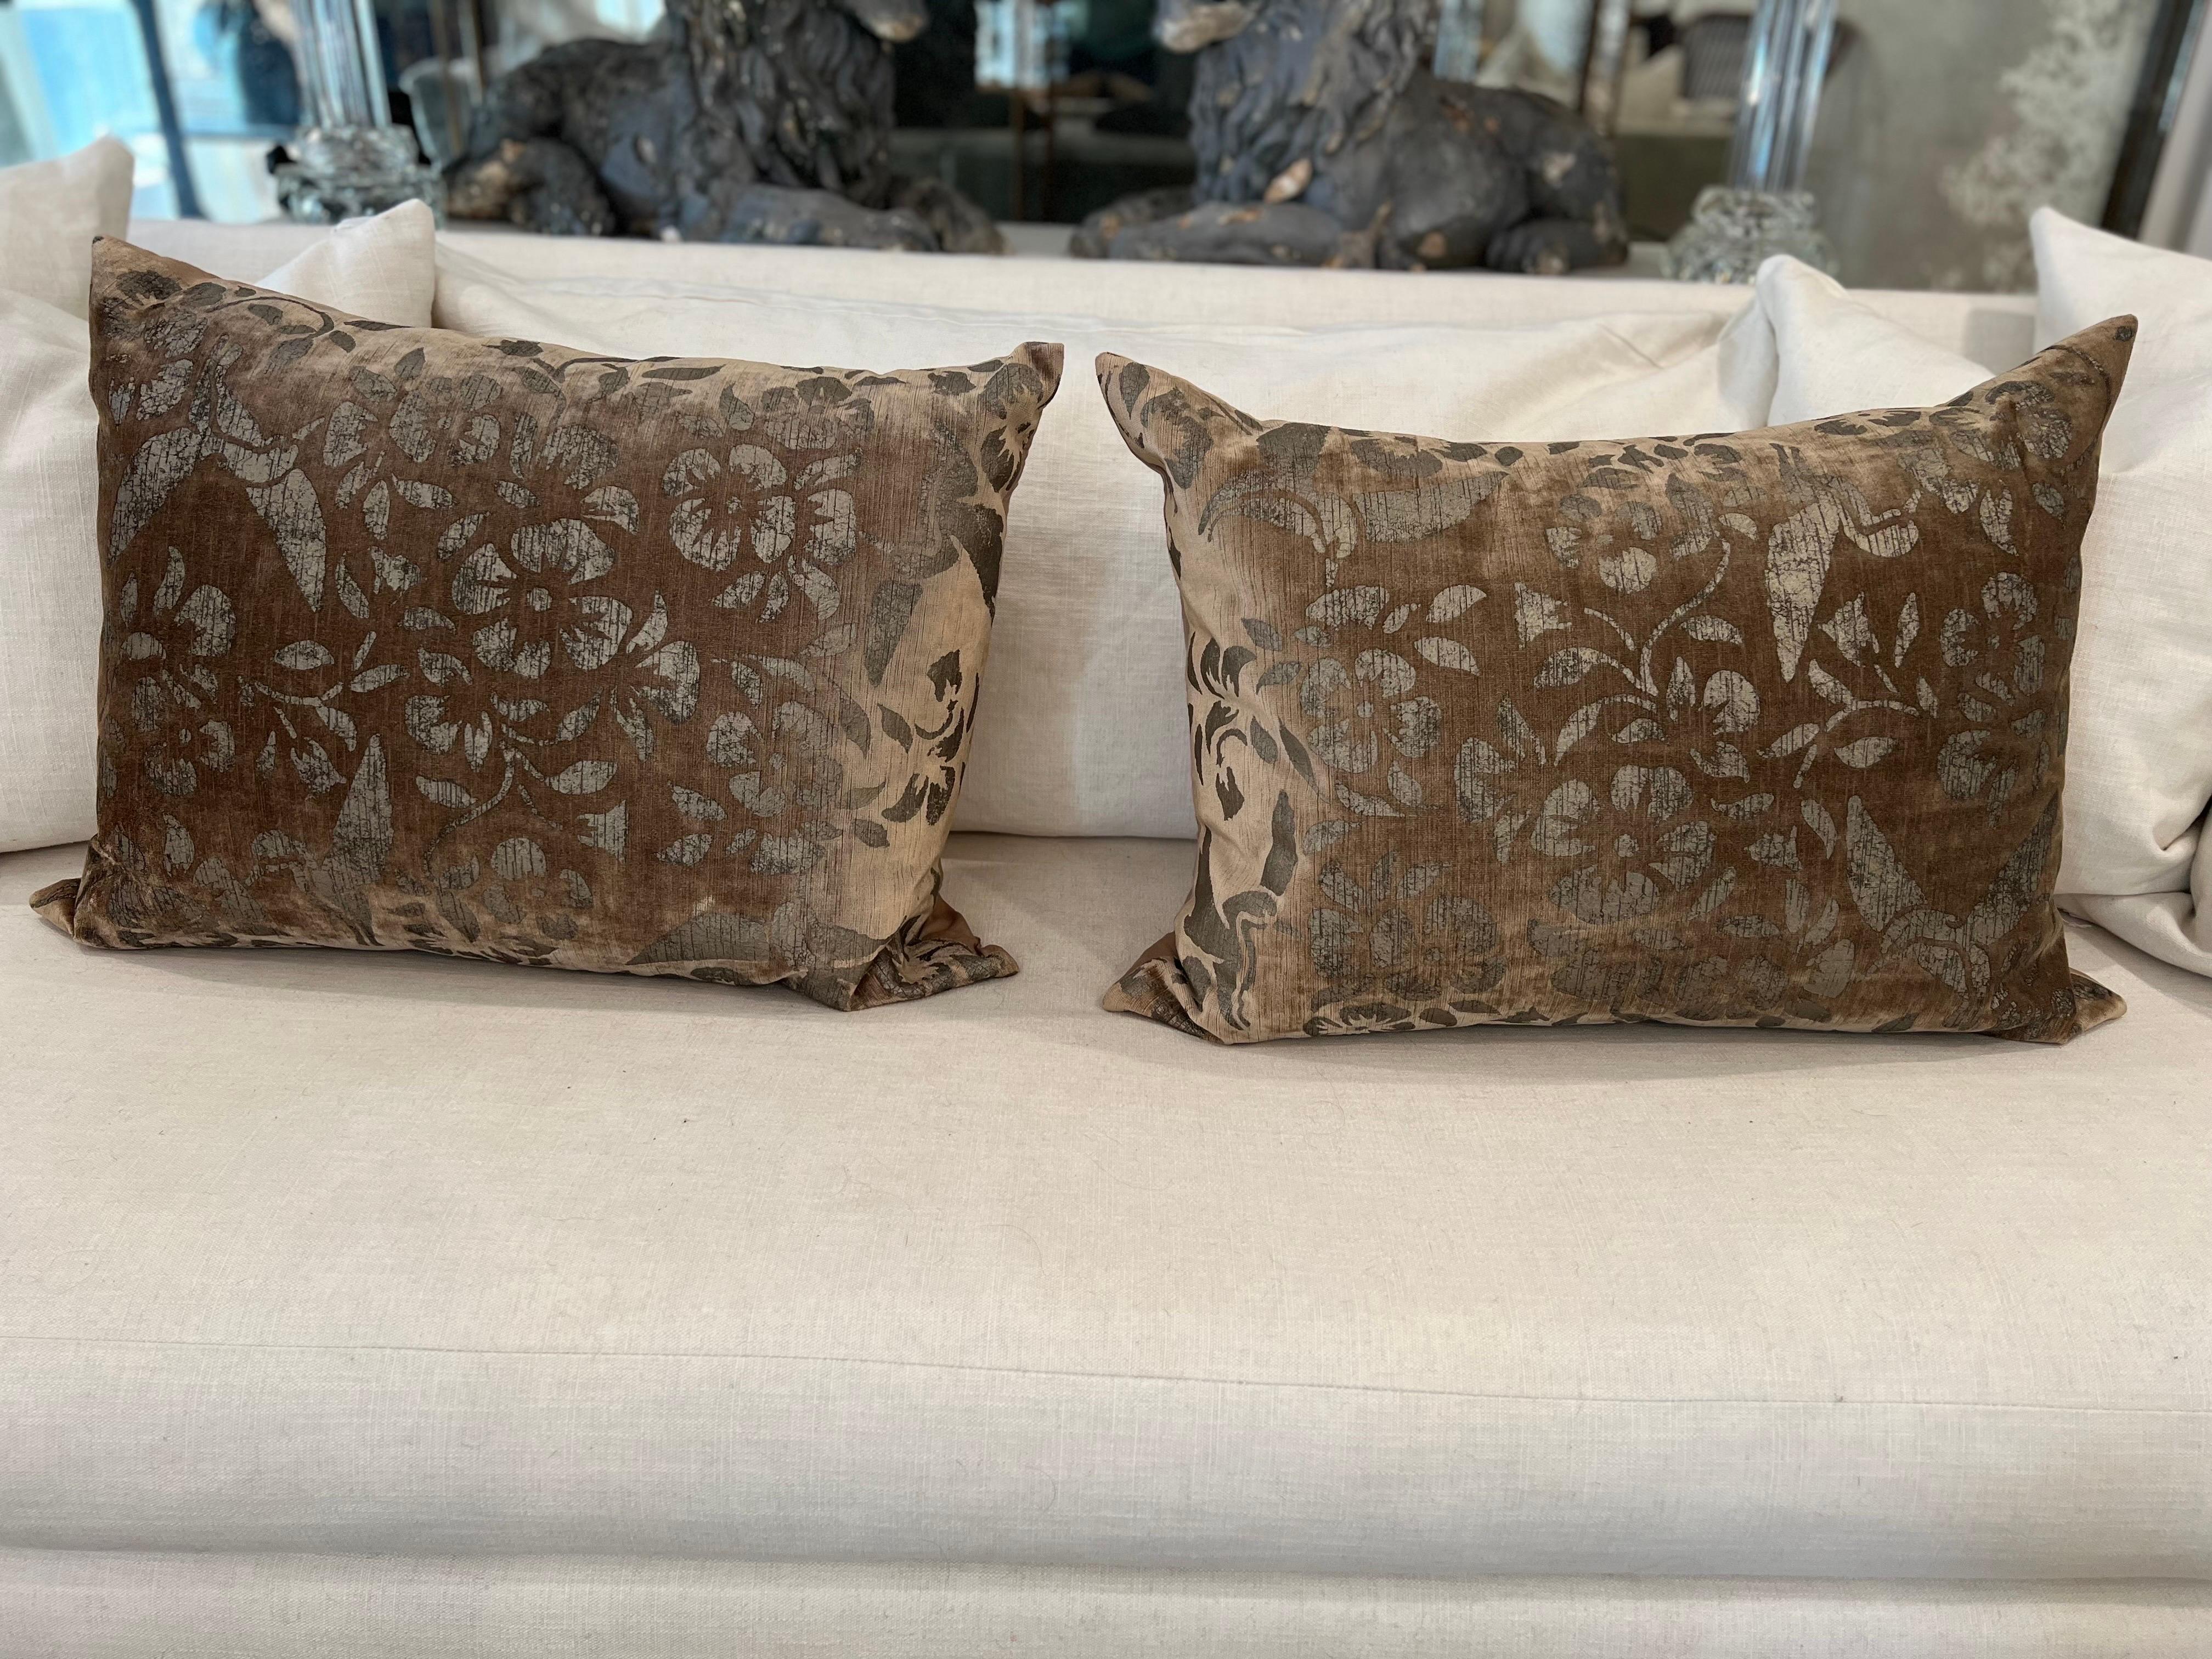 Pair of hand-painted velvet pillows with silk backs.  Tan silver/gold sheen.
These were imported in the early 2000's and have had light use.  There are some spots on the silk as seen in the pics.  Zipper closure.
Includes feather inserts.  